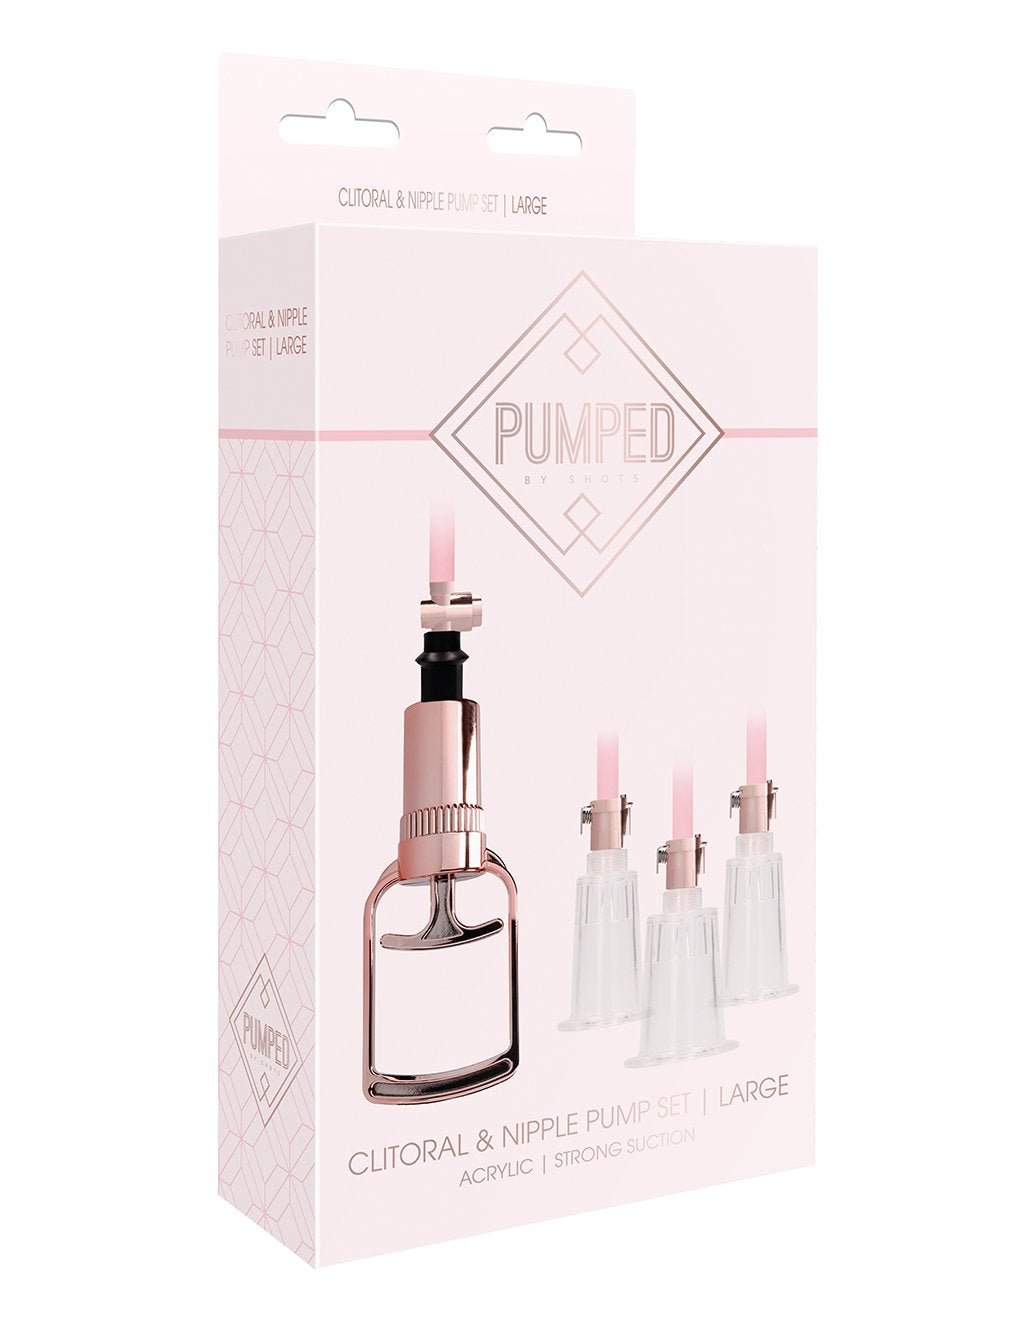 Pumped Rose Gold Clitoral and Nipple Pump Set- Large- Front Box